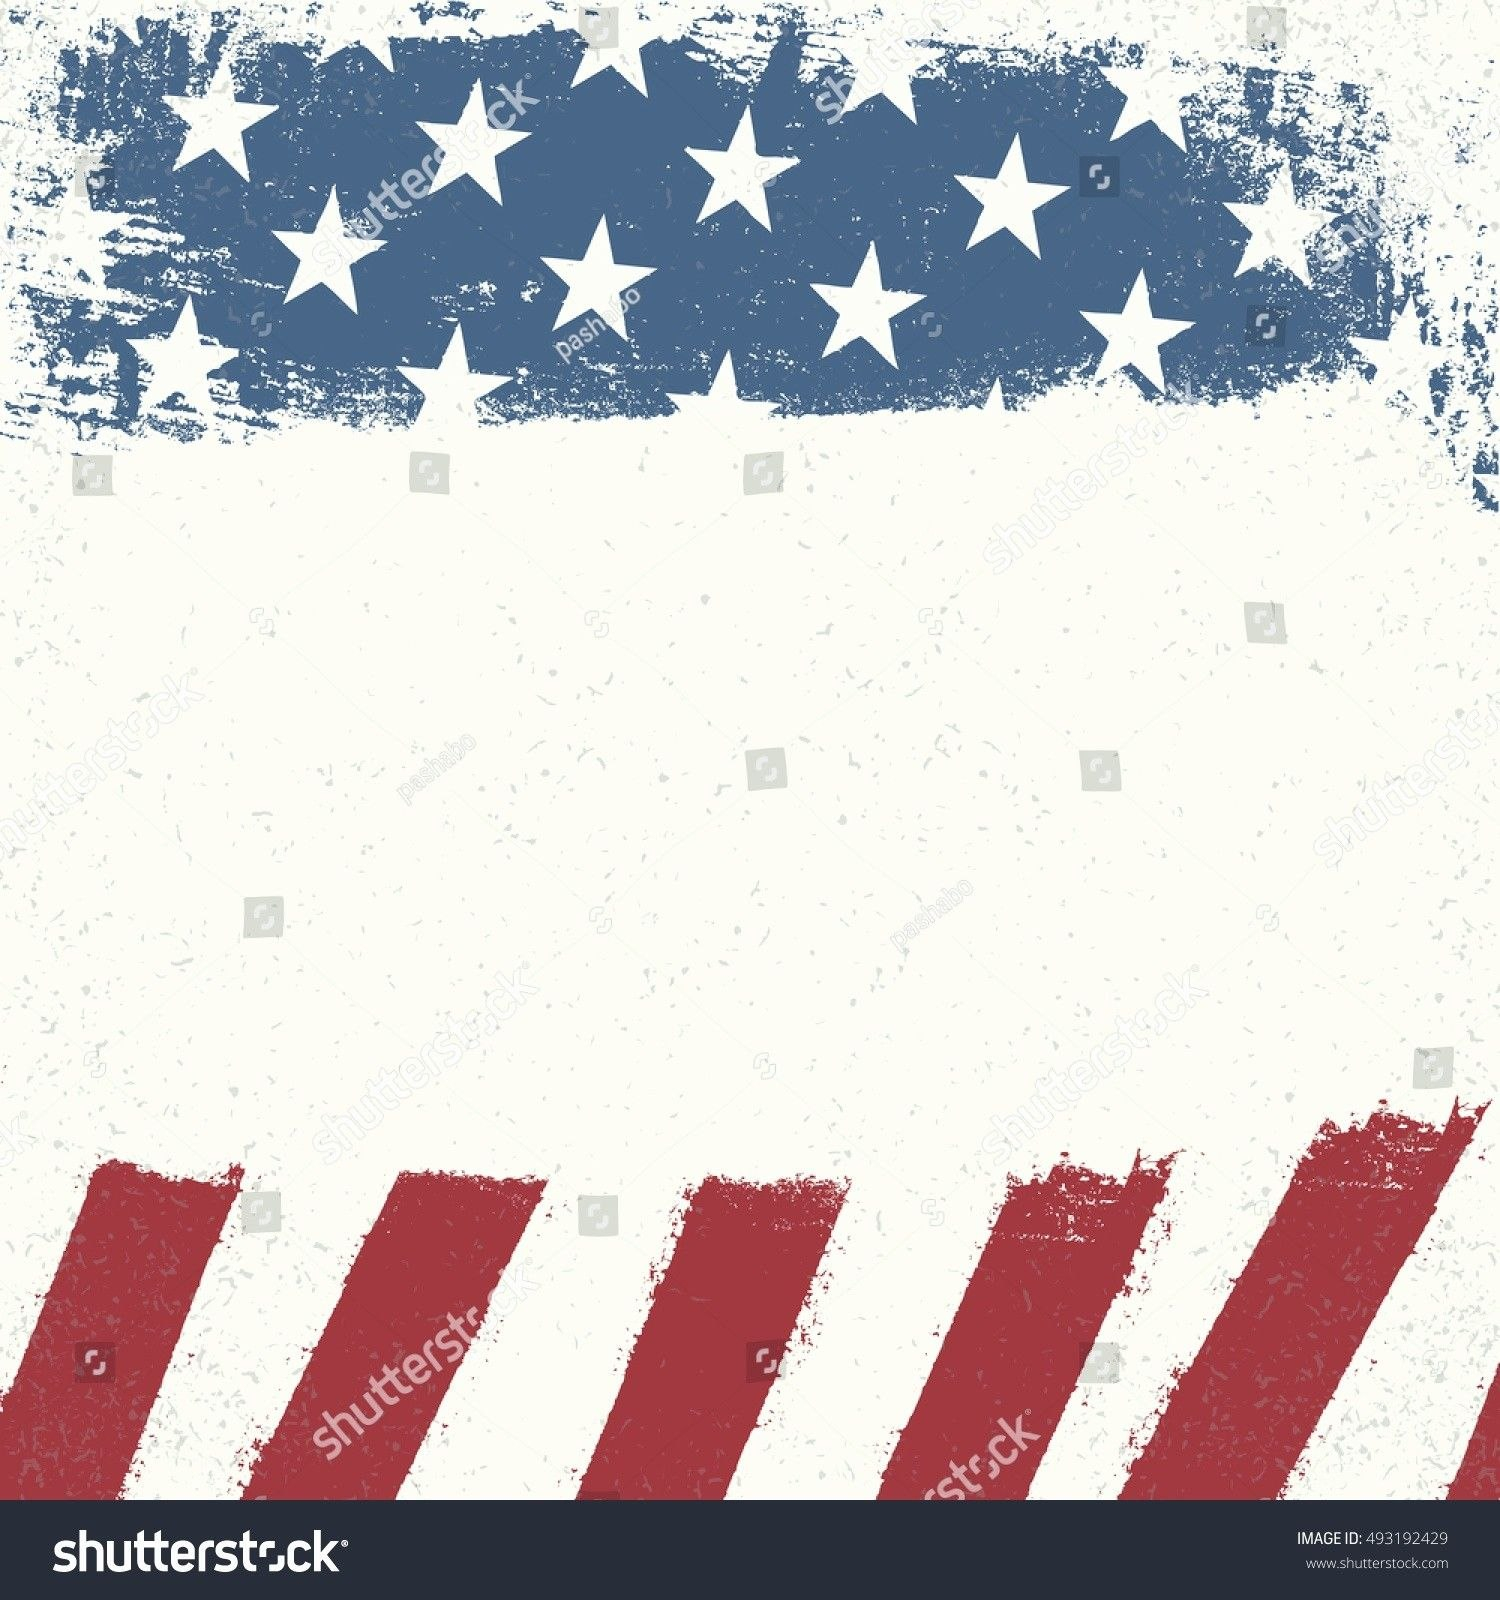 Patriotic Powerpoint Template Awesome Usa Powerpoint Template pertaining to Patriotic Powerpoint Template